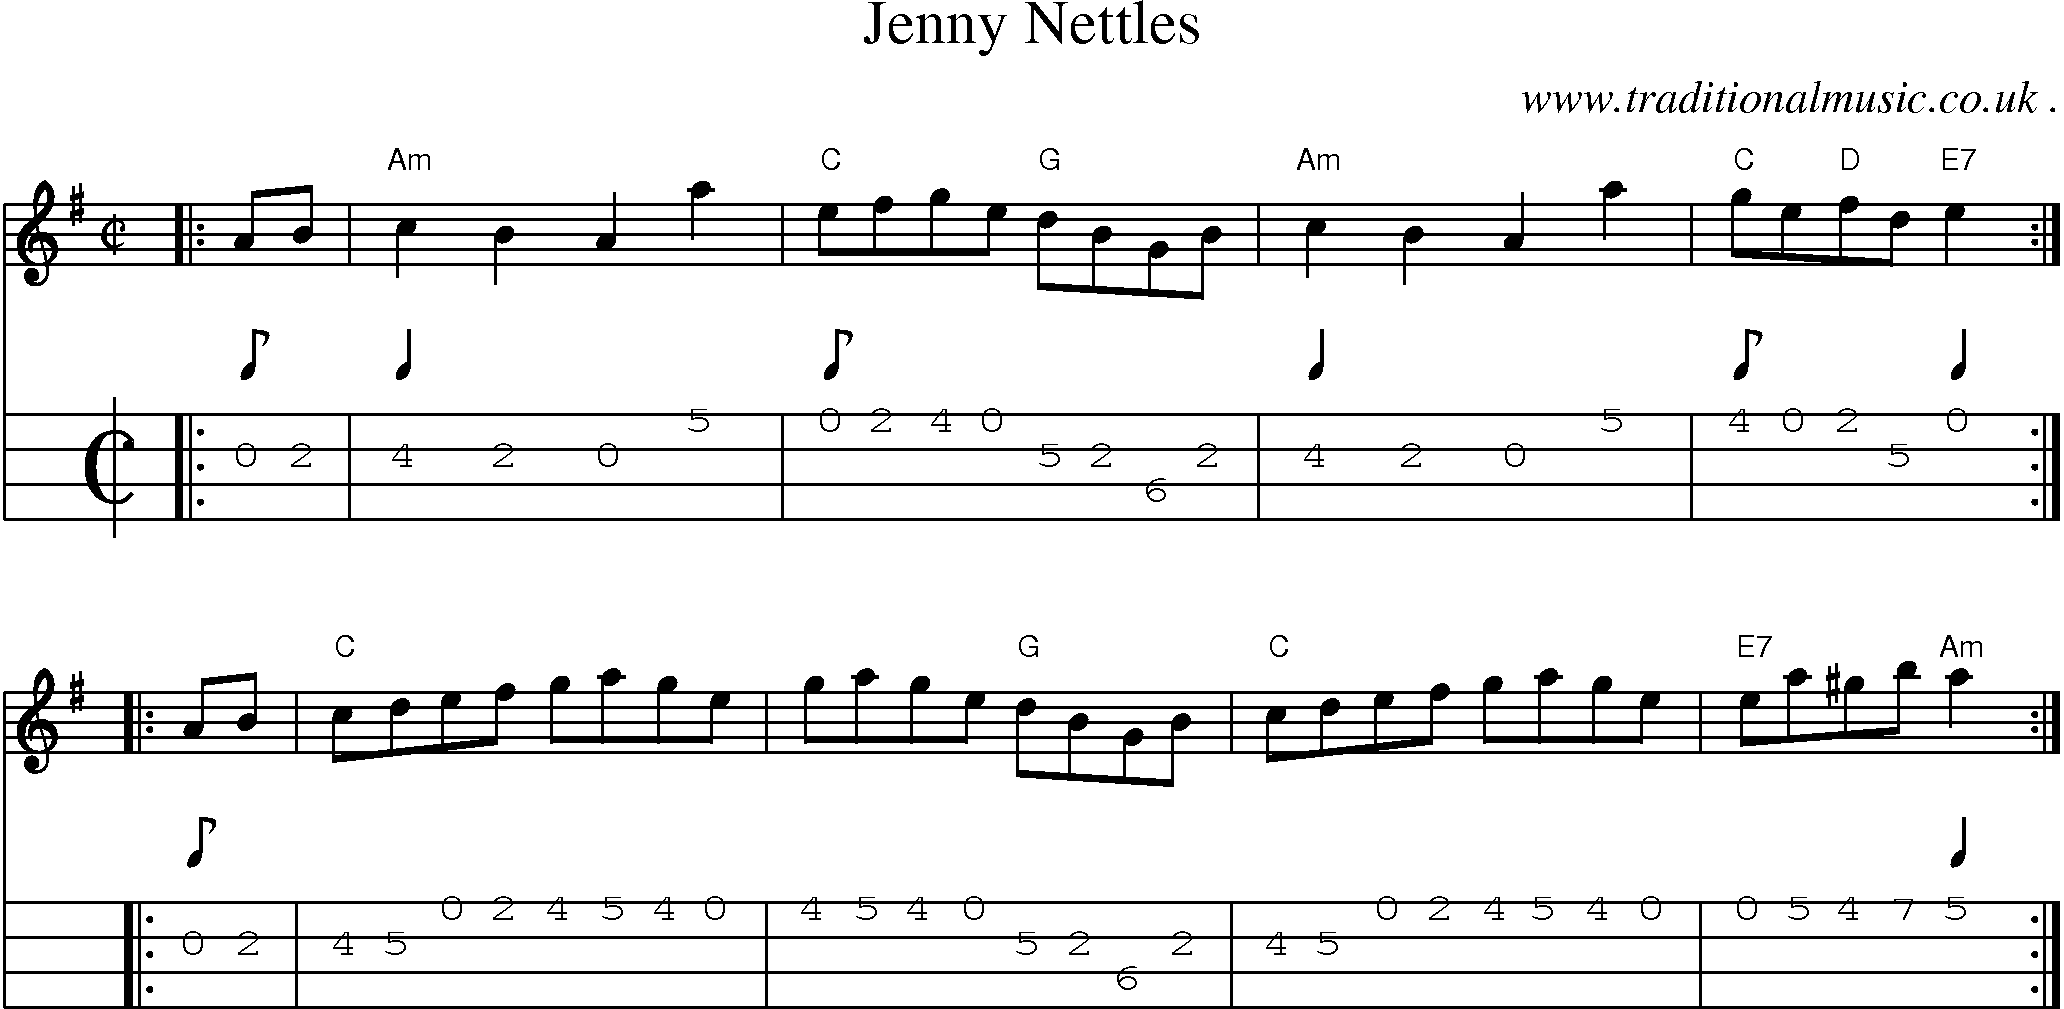 Sheet-music  score, Chords and Mandolin Tabs for Jenny Nettles